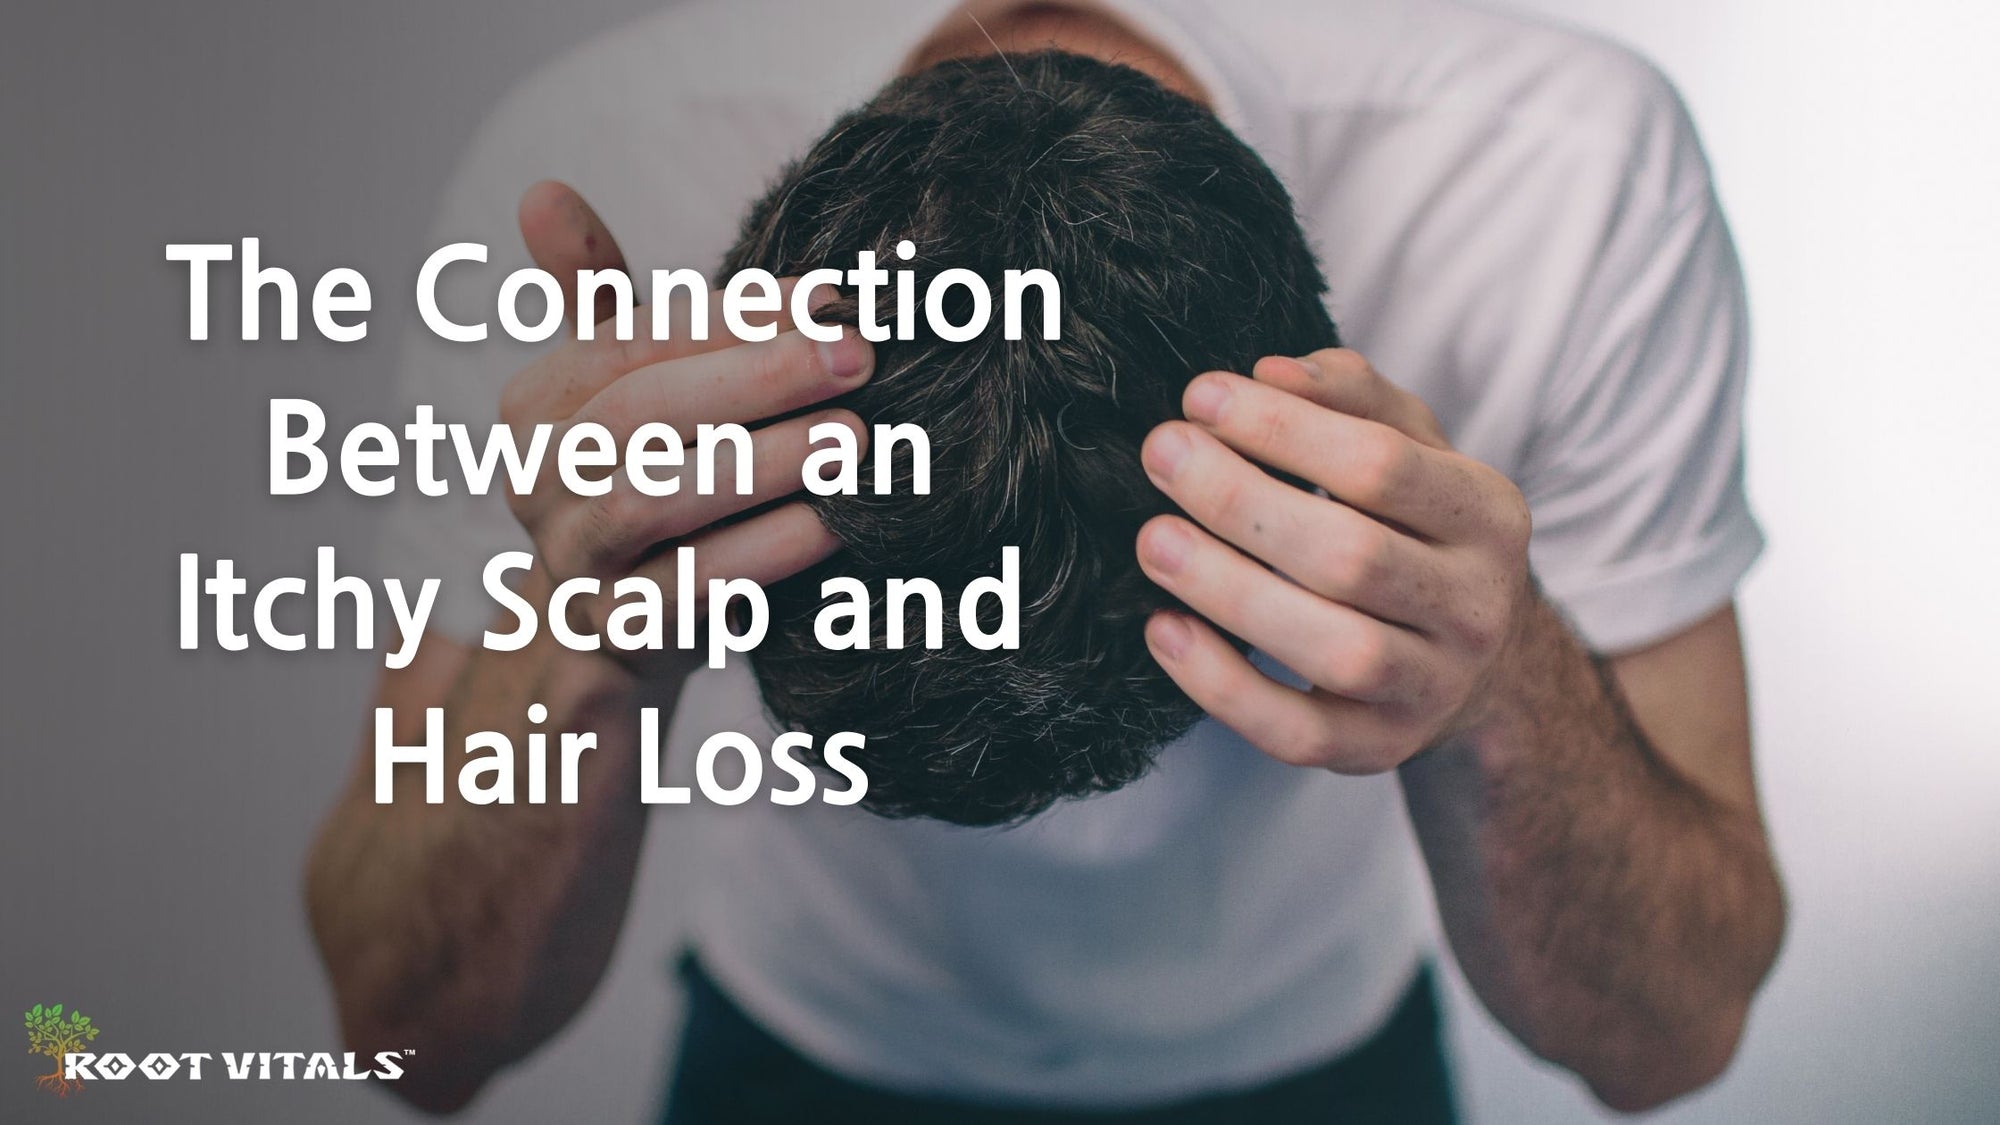 The Connection Between an Itchy Scalp and Hair Loss